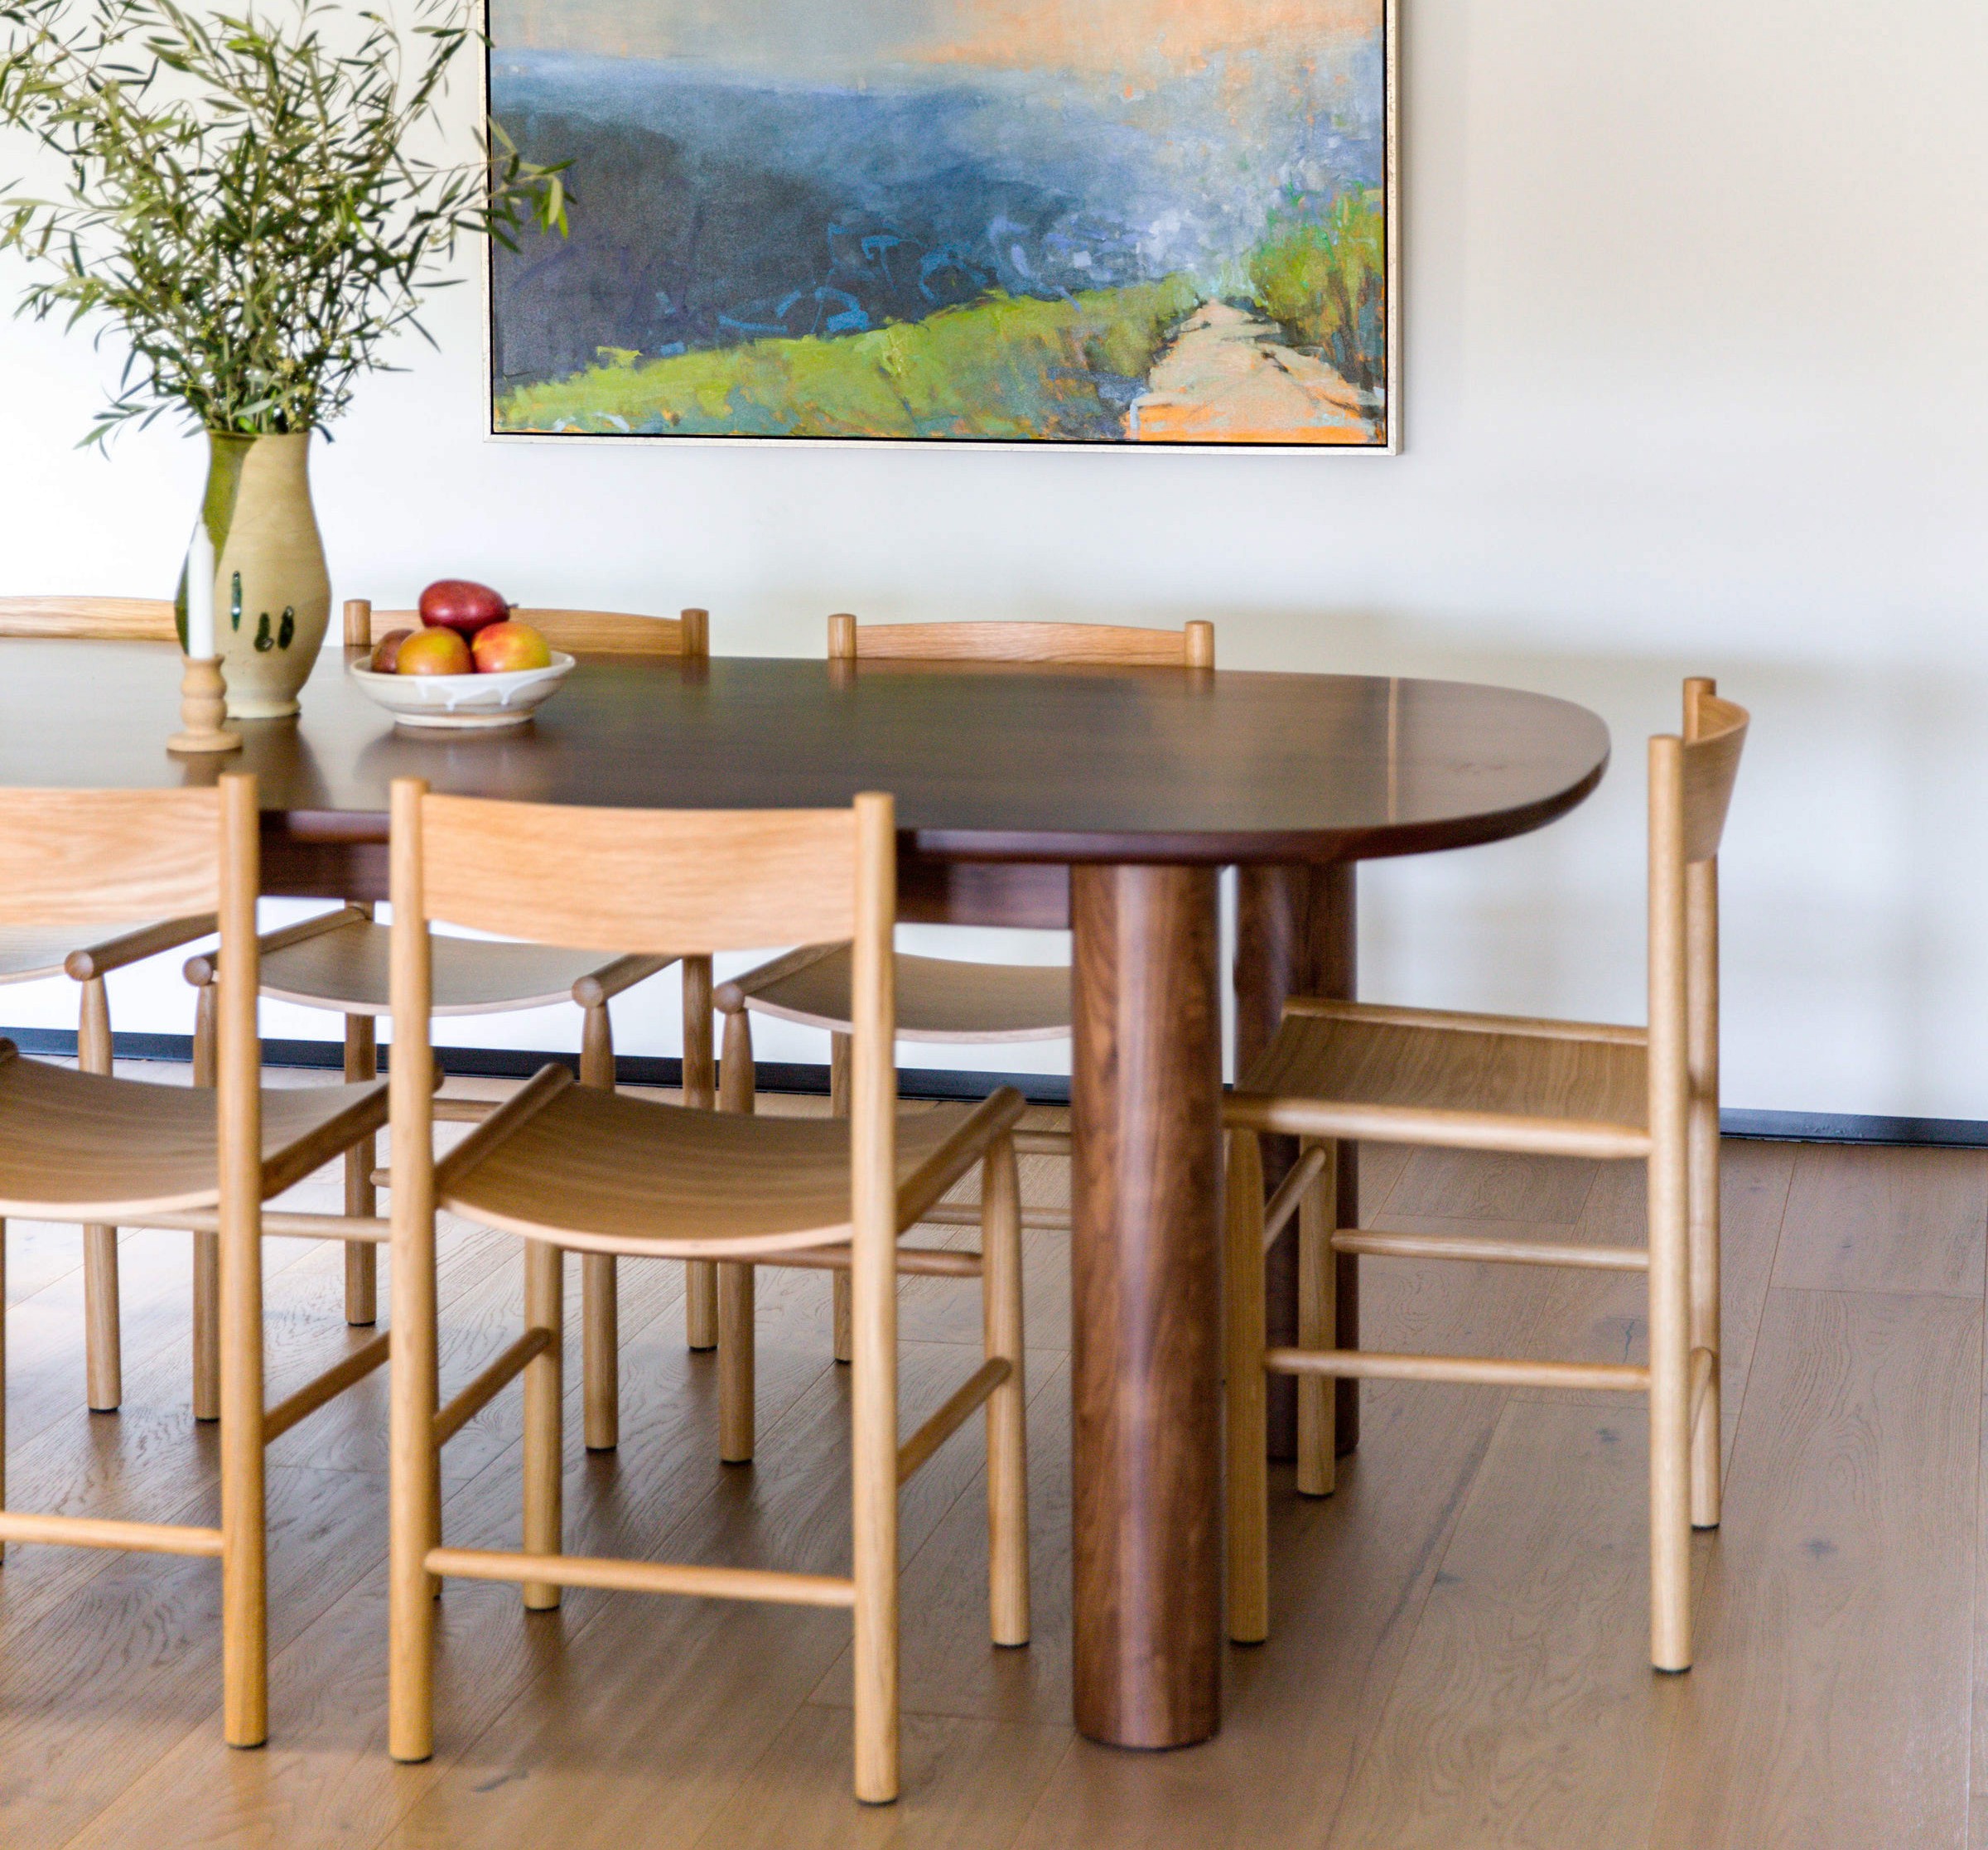 a painting hangs above a dining room table